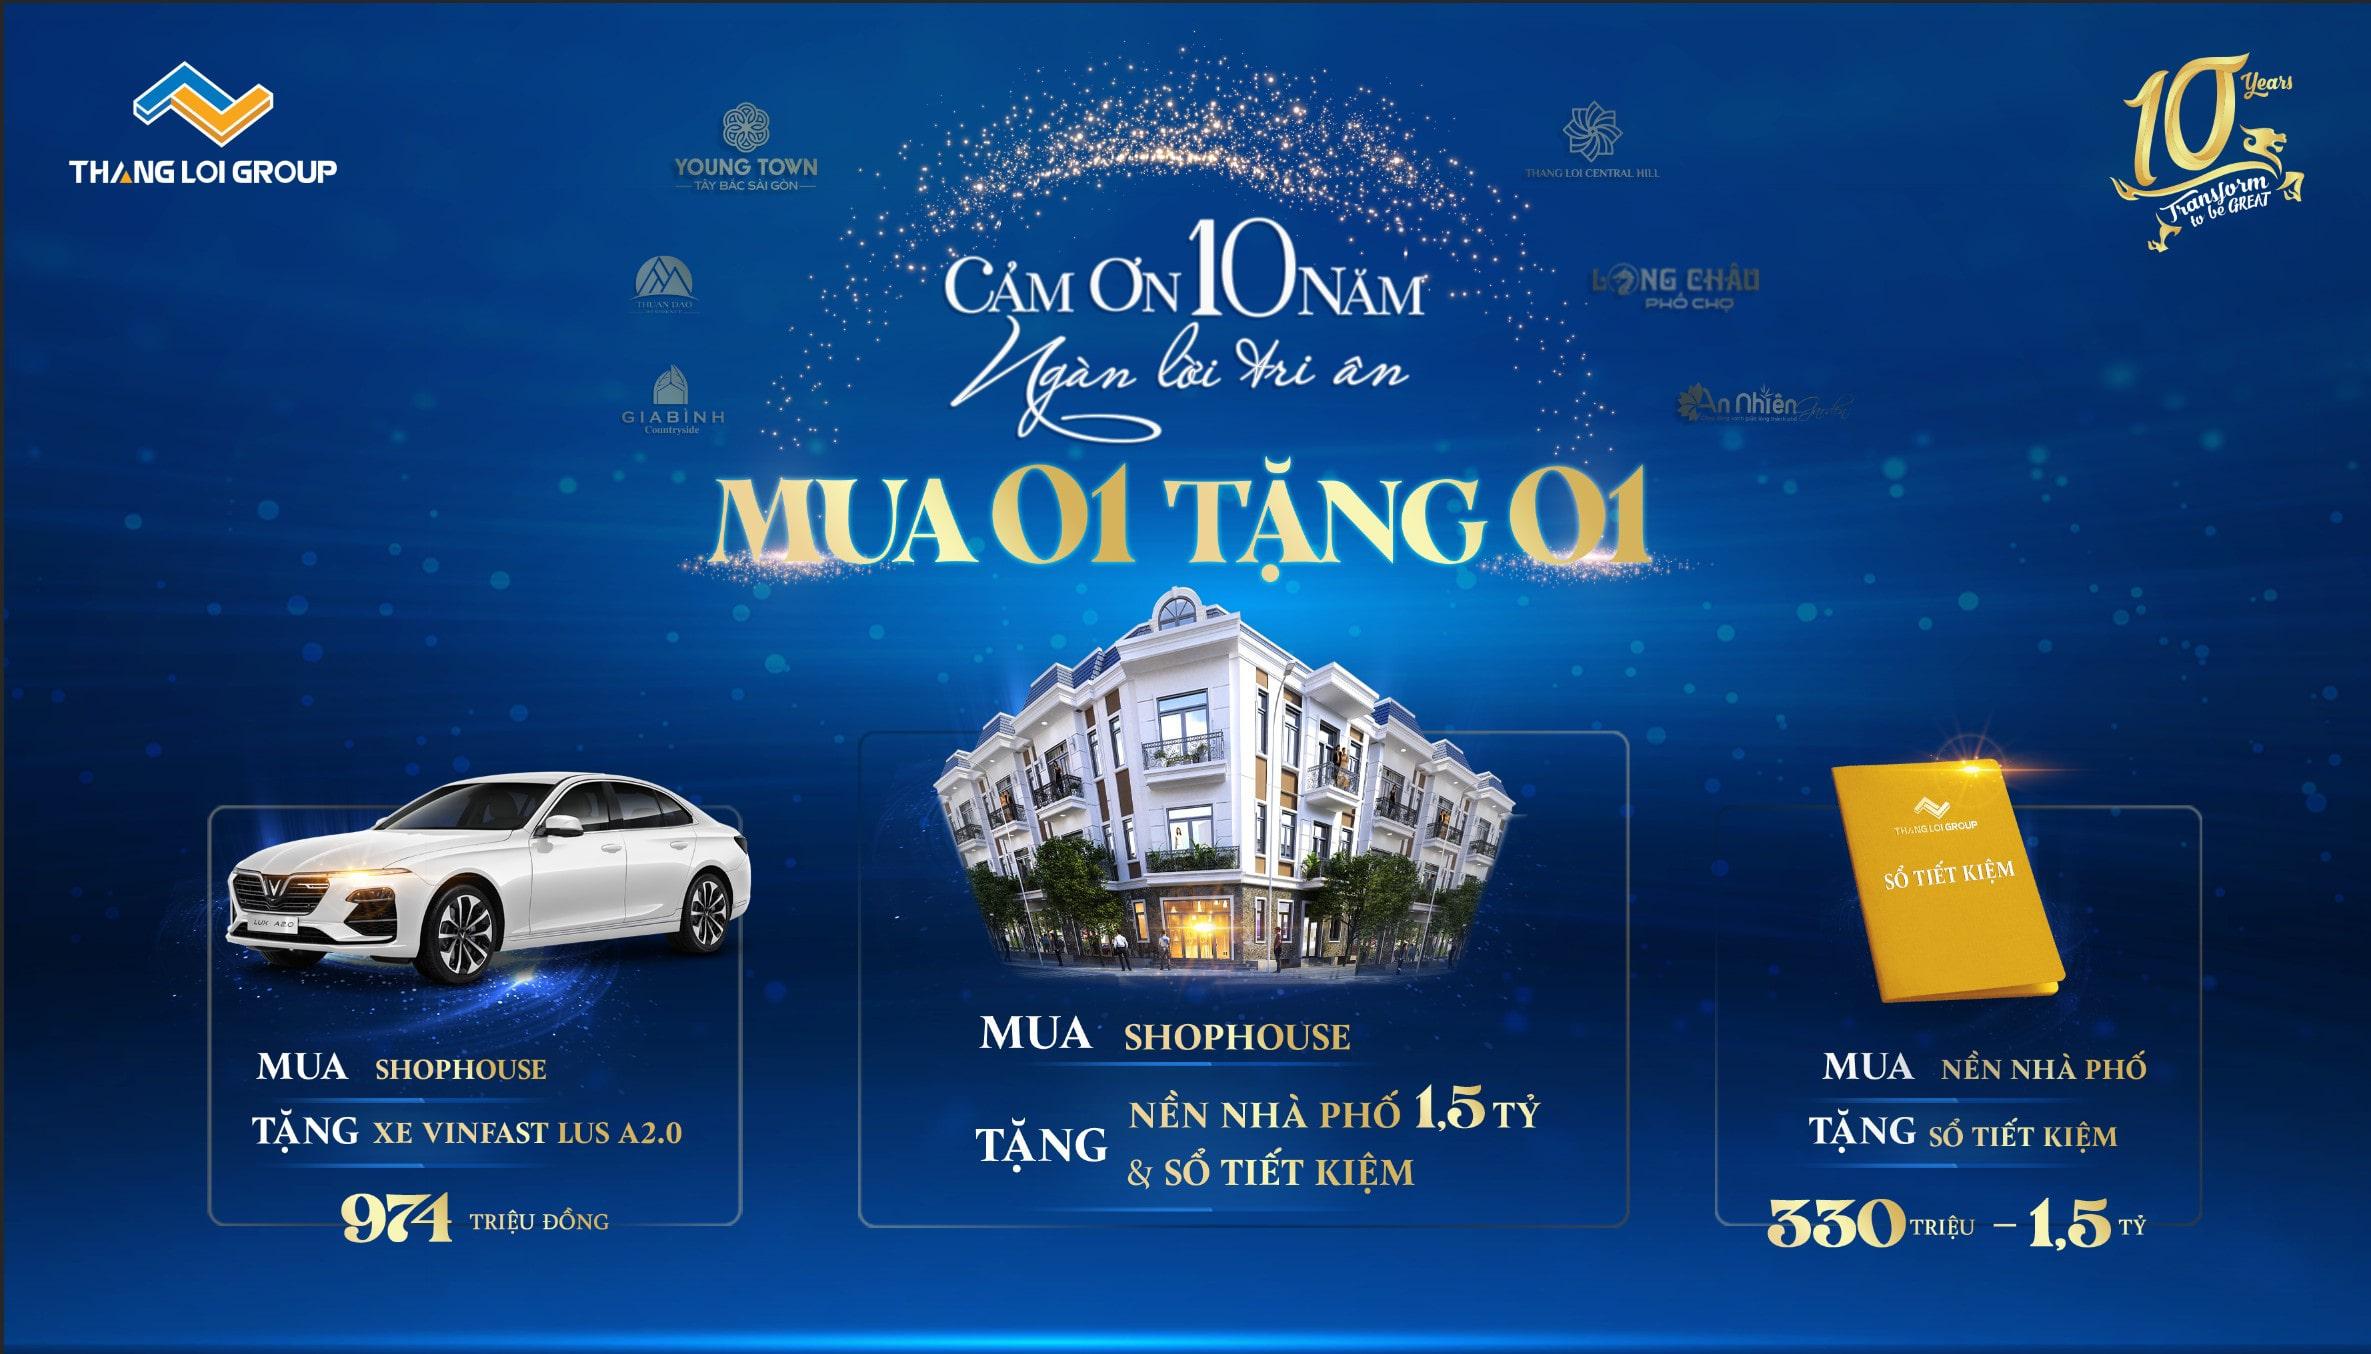 Celebrate the 10th anniversary of Thang Loi Group's establishment, launch a huge promotion package 